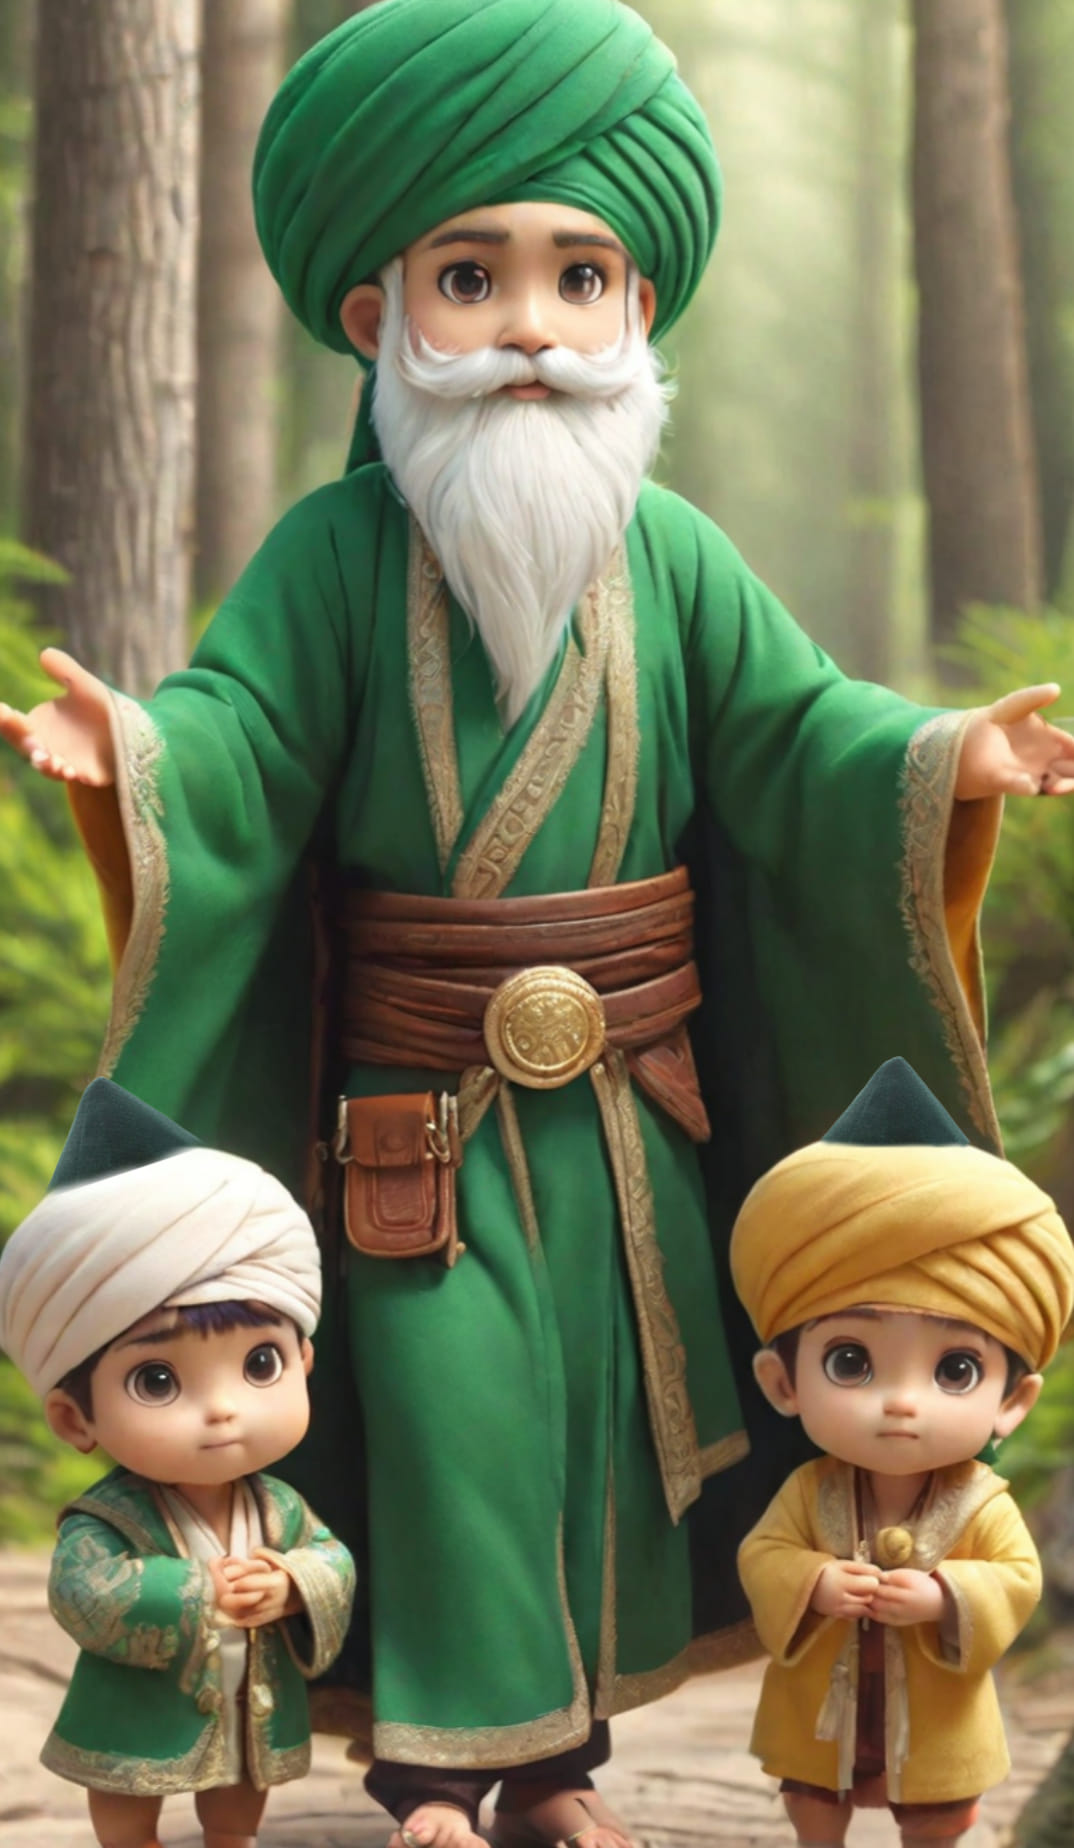 A sufi man in a forest with two children wearing sunnah attire